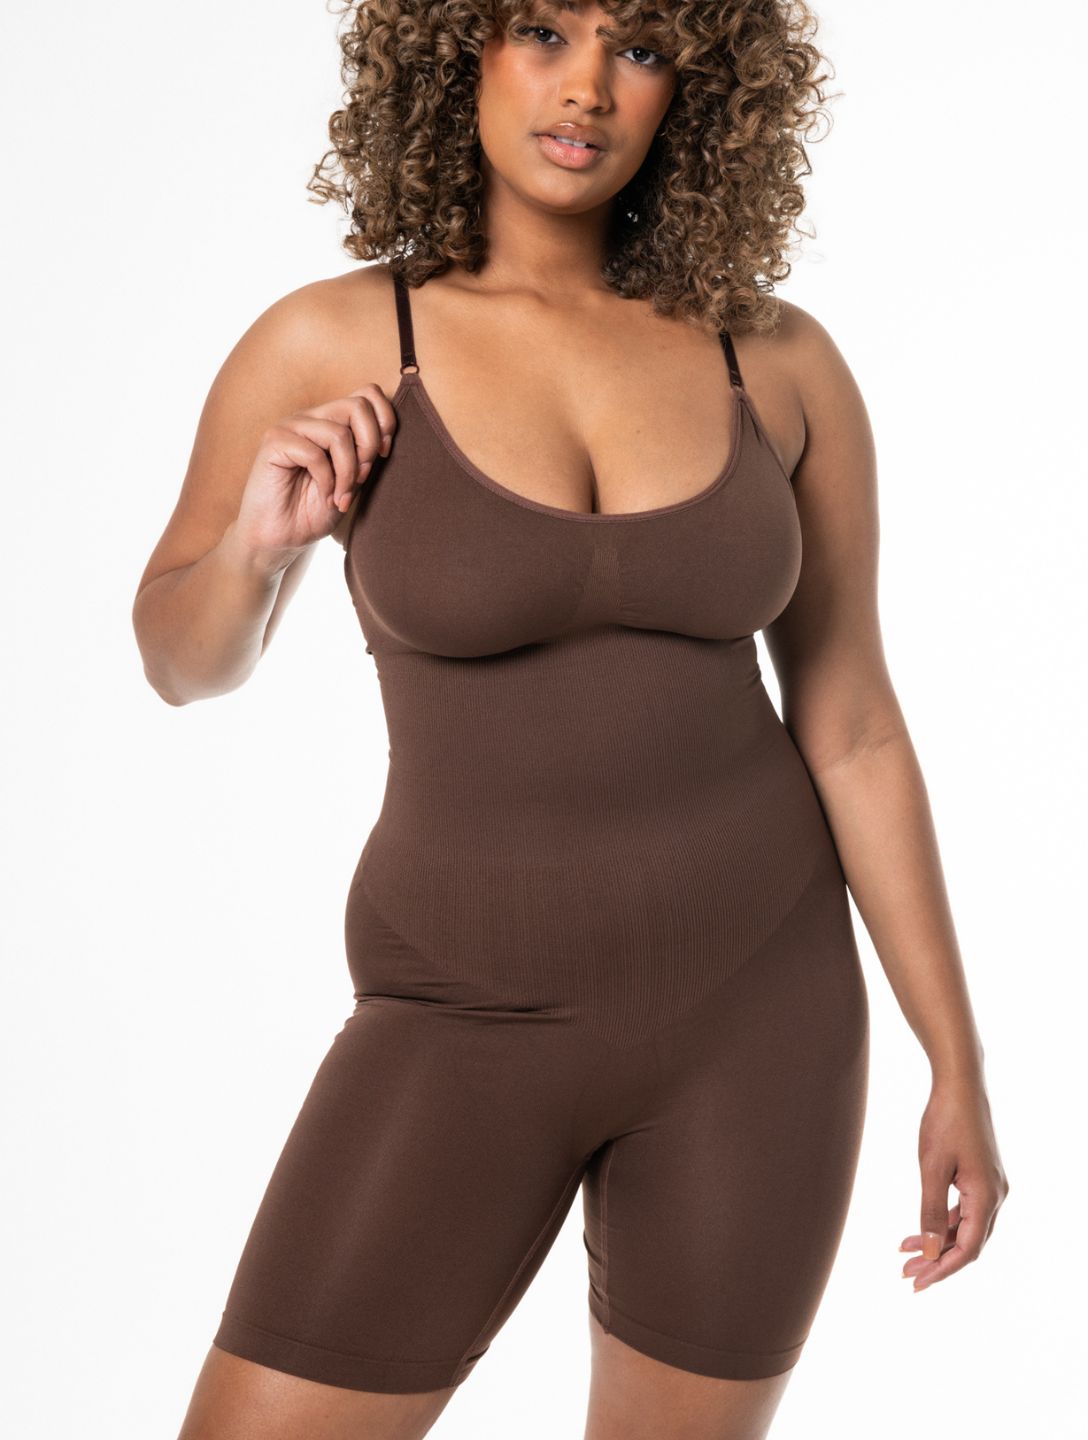 Shapewear Size Guide for 6 Different Shapewear